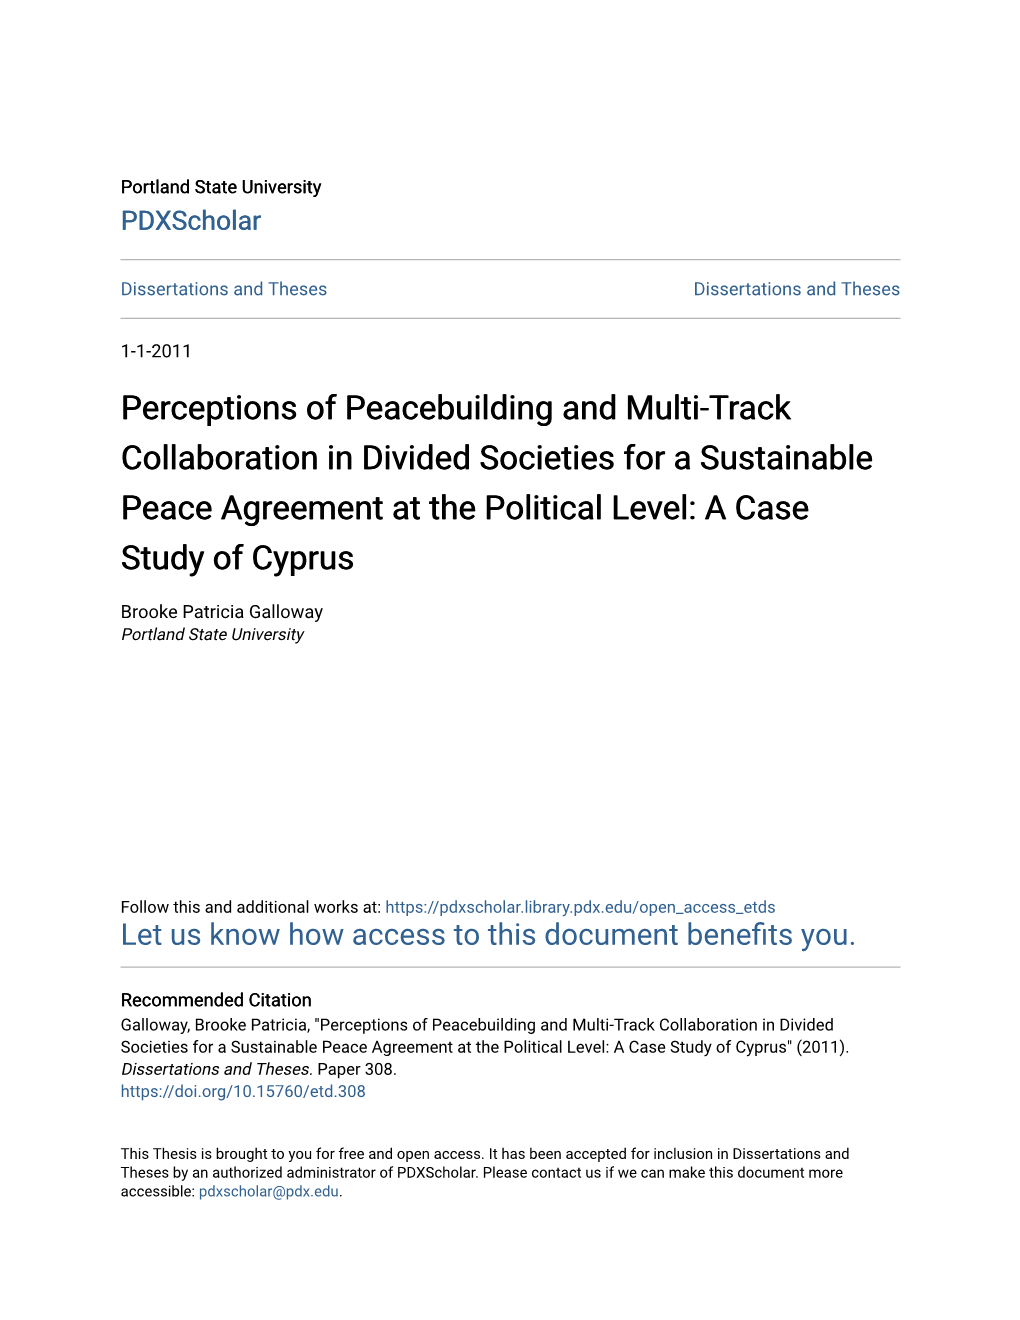 Perceptions of Peacebuilding and Multi-Track Collaboration in Divided Societies for a Sustainable Peace Agreement at the Political Level: a Case Study of Cyprus